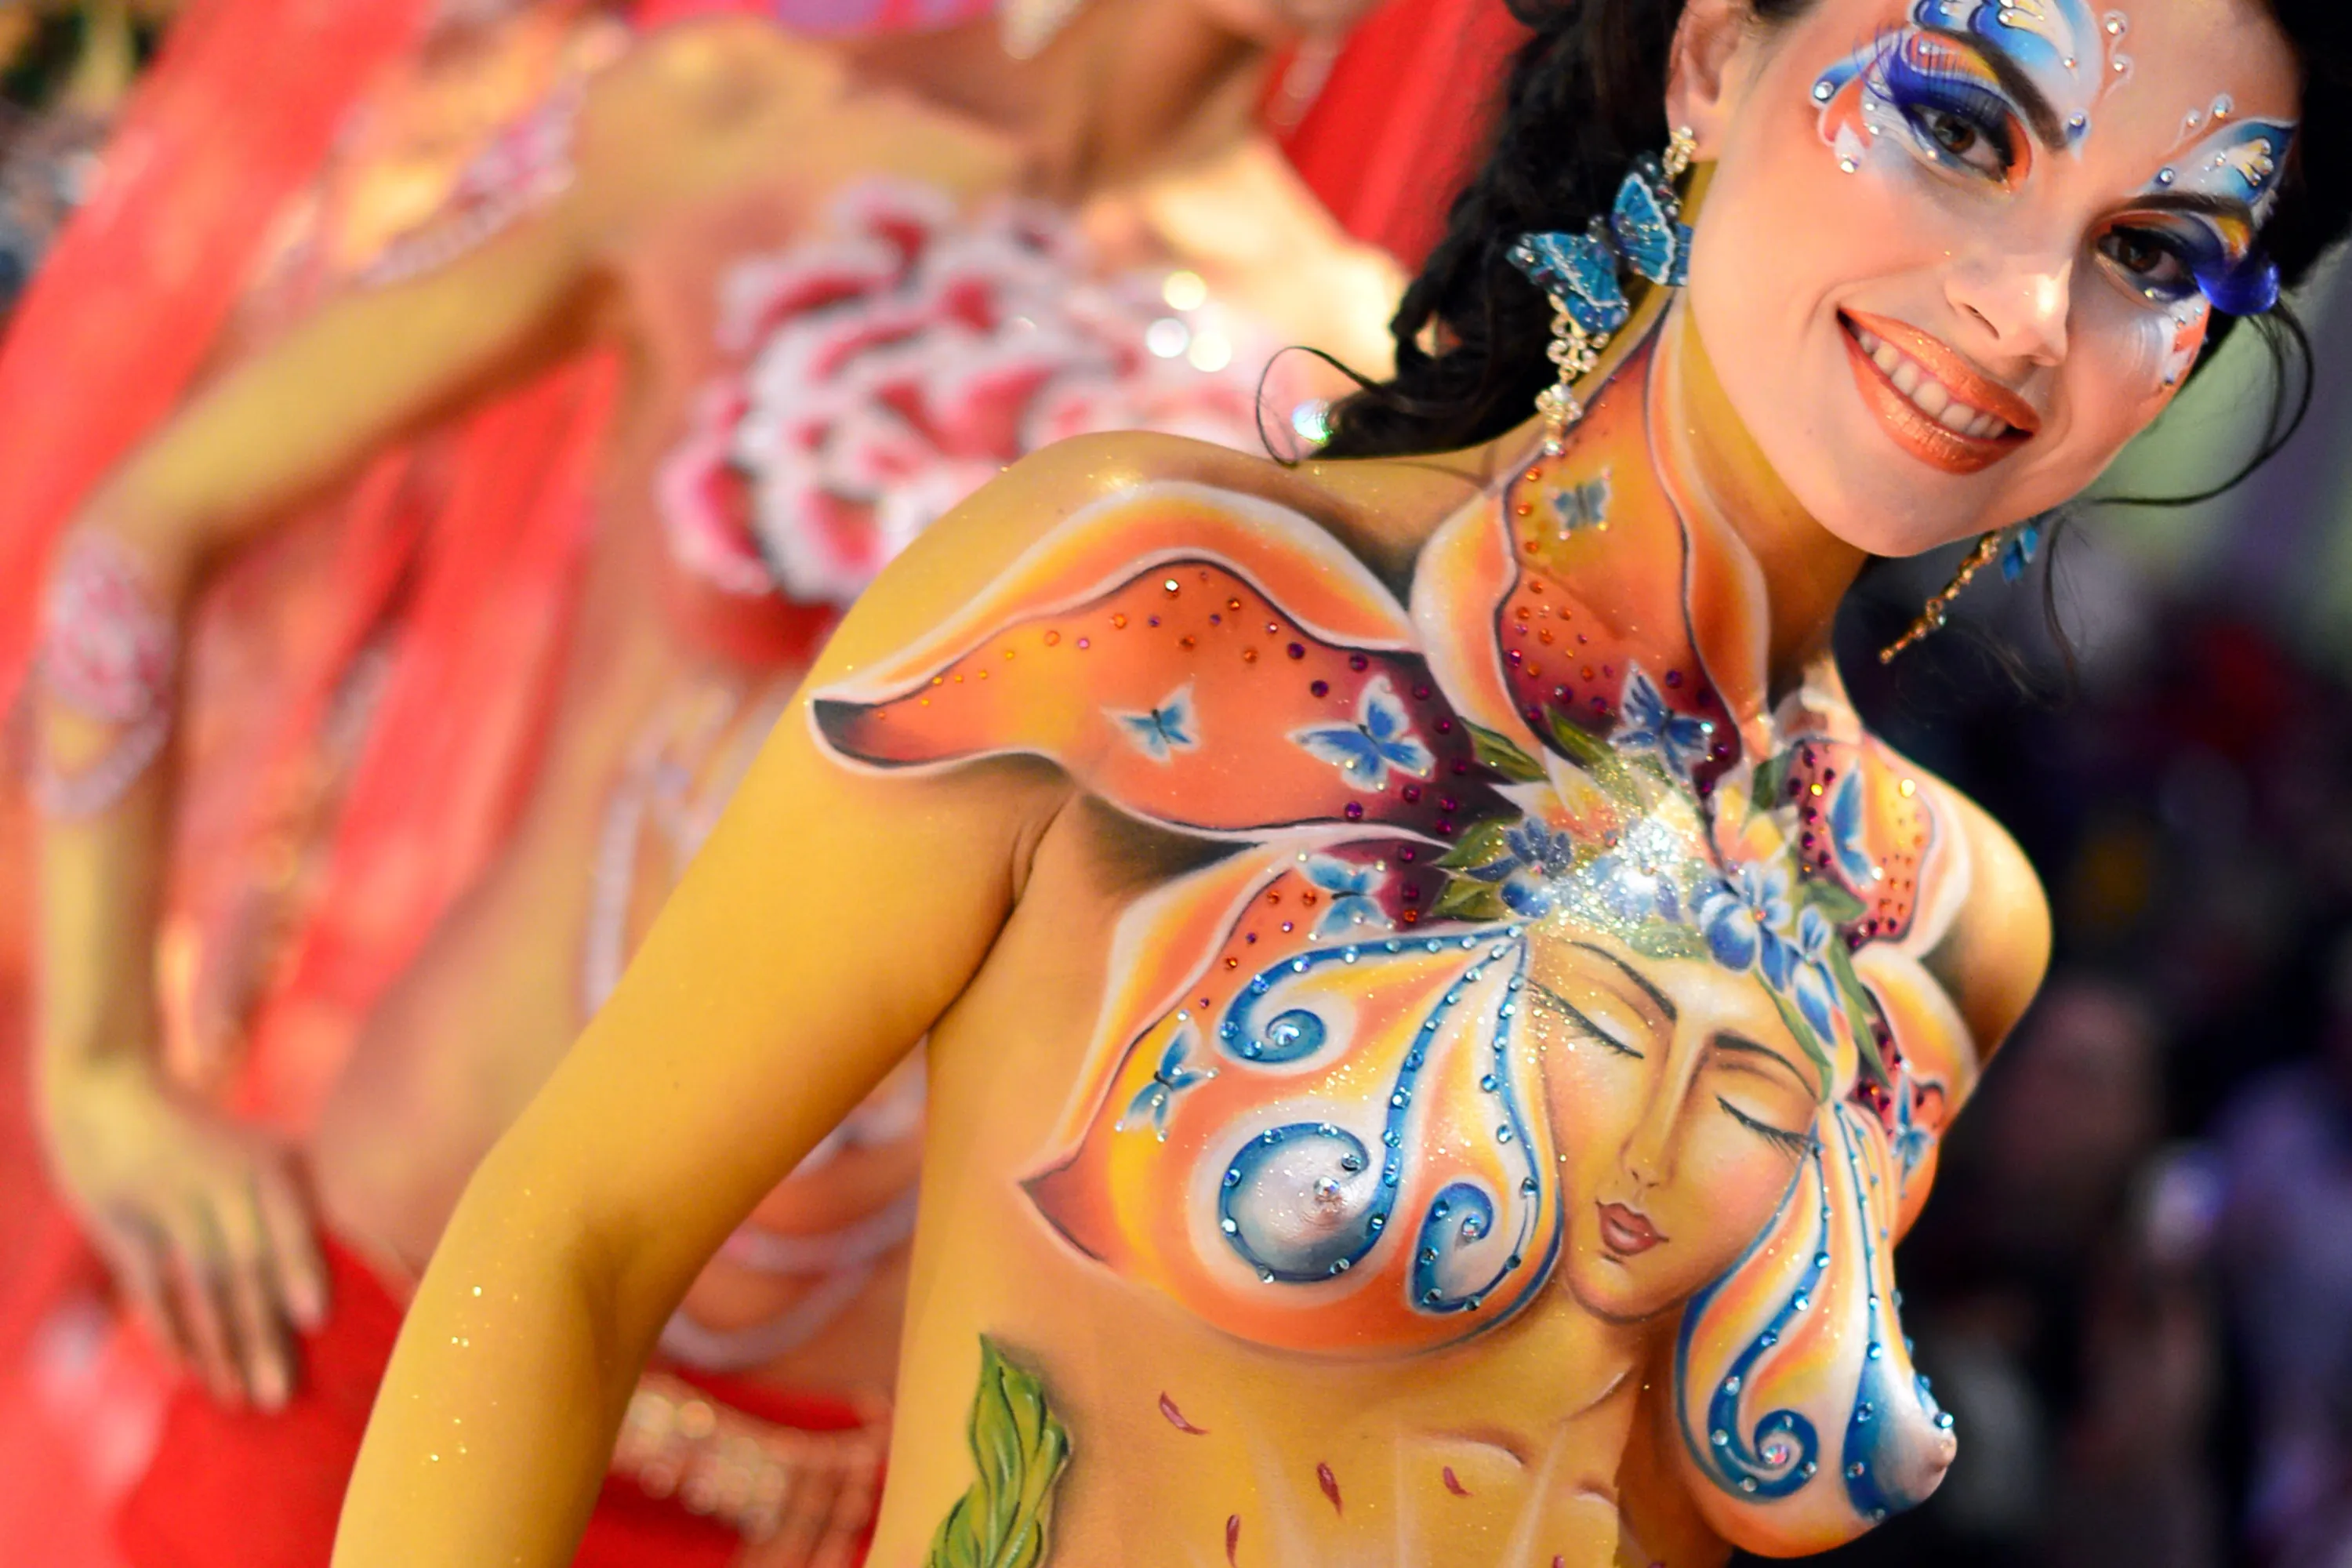 Next picture →. A model poses after the contest "Body Painting" o...